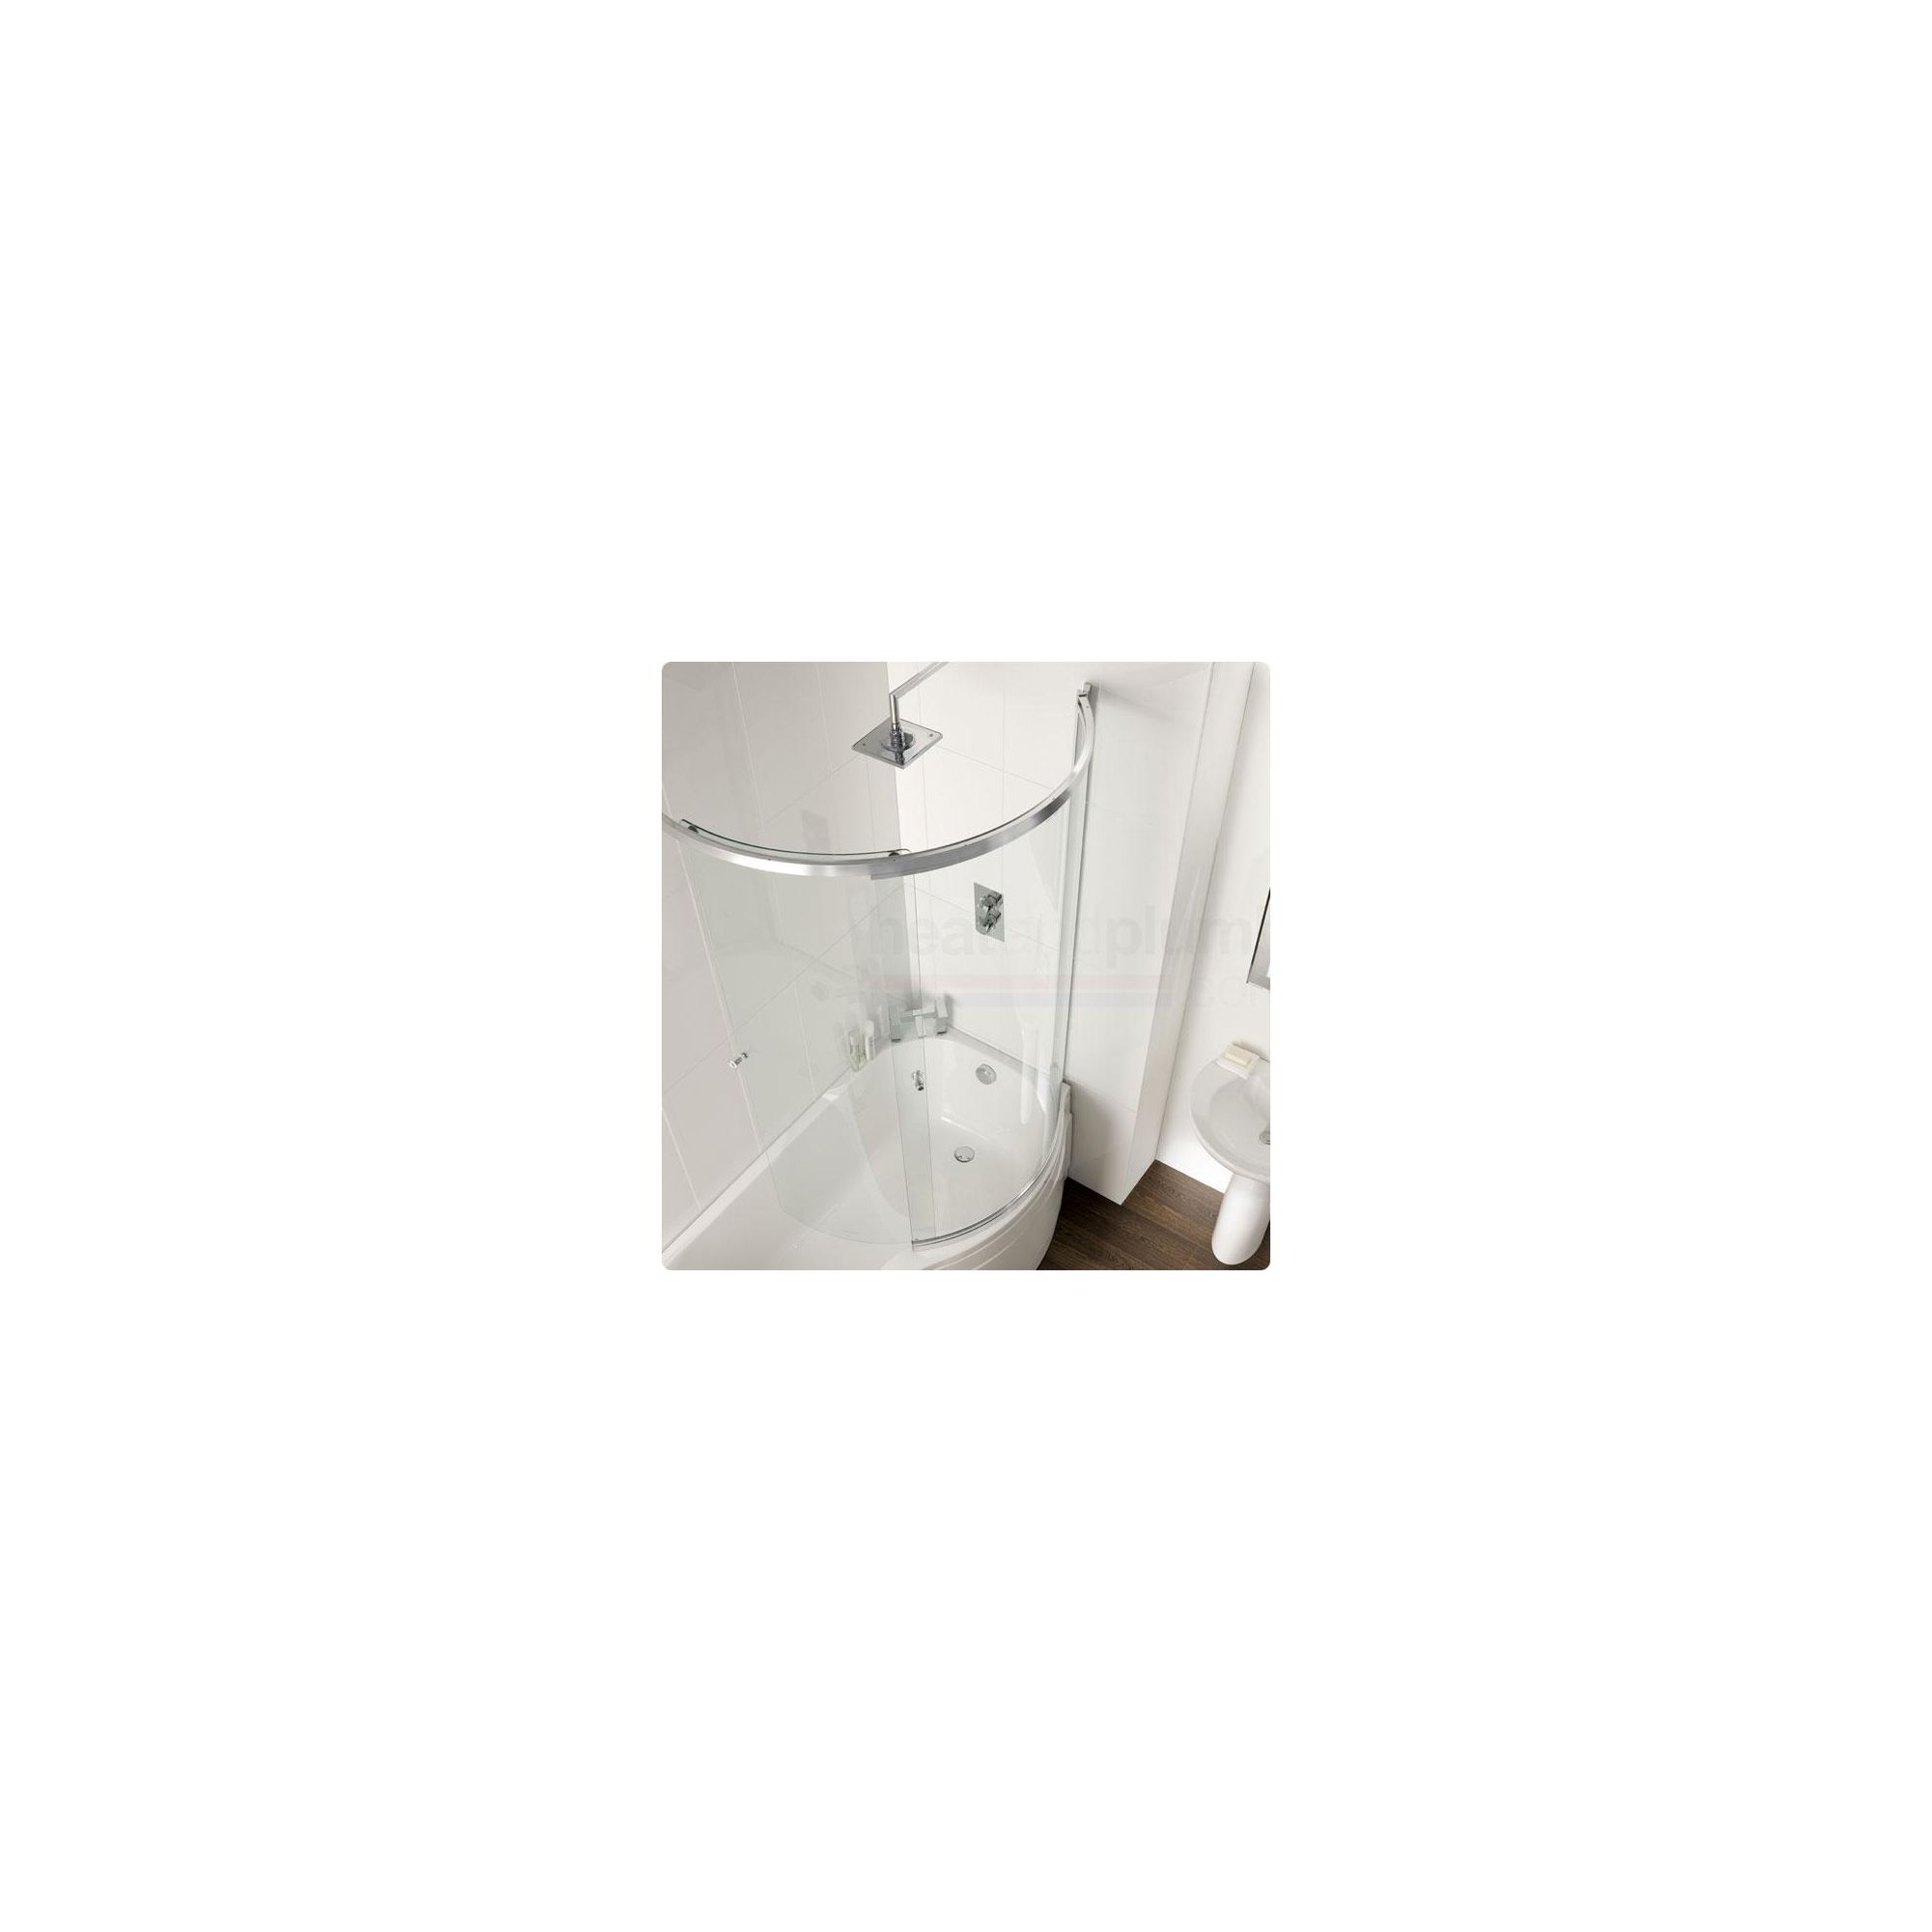 Duchy AUTUMN Curved Showerbath Bath Panel with Extending Sliding Enclosing Panel with Silver Profile (1000mm Wide x 1620mm High) at Tesco Direct